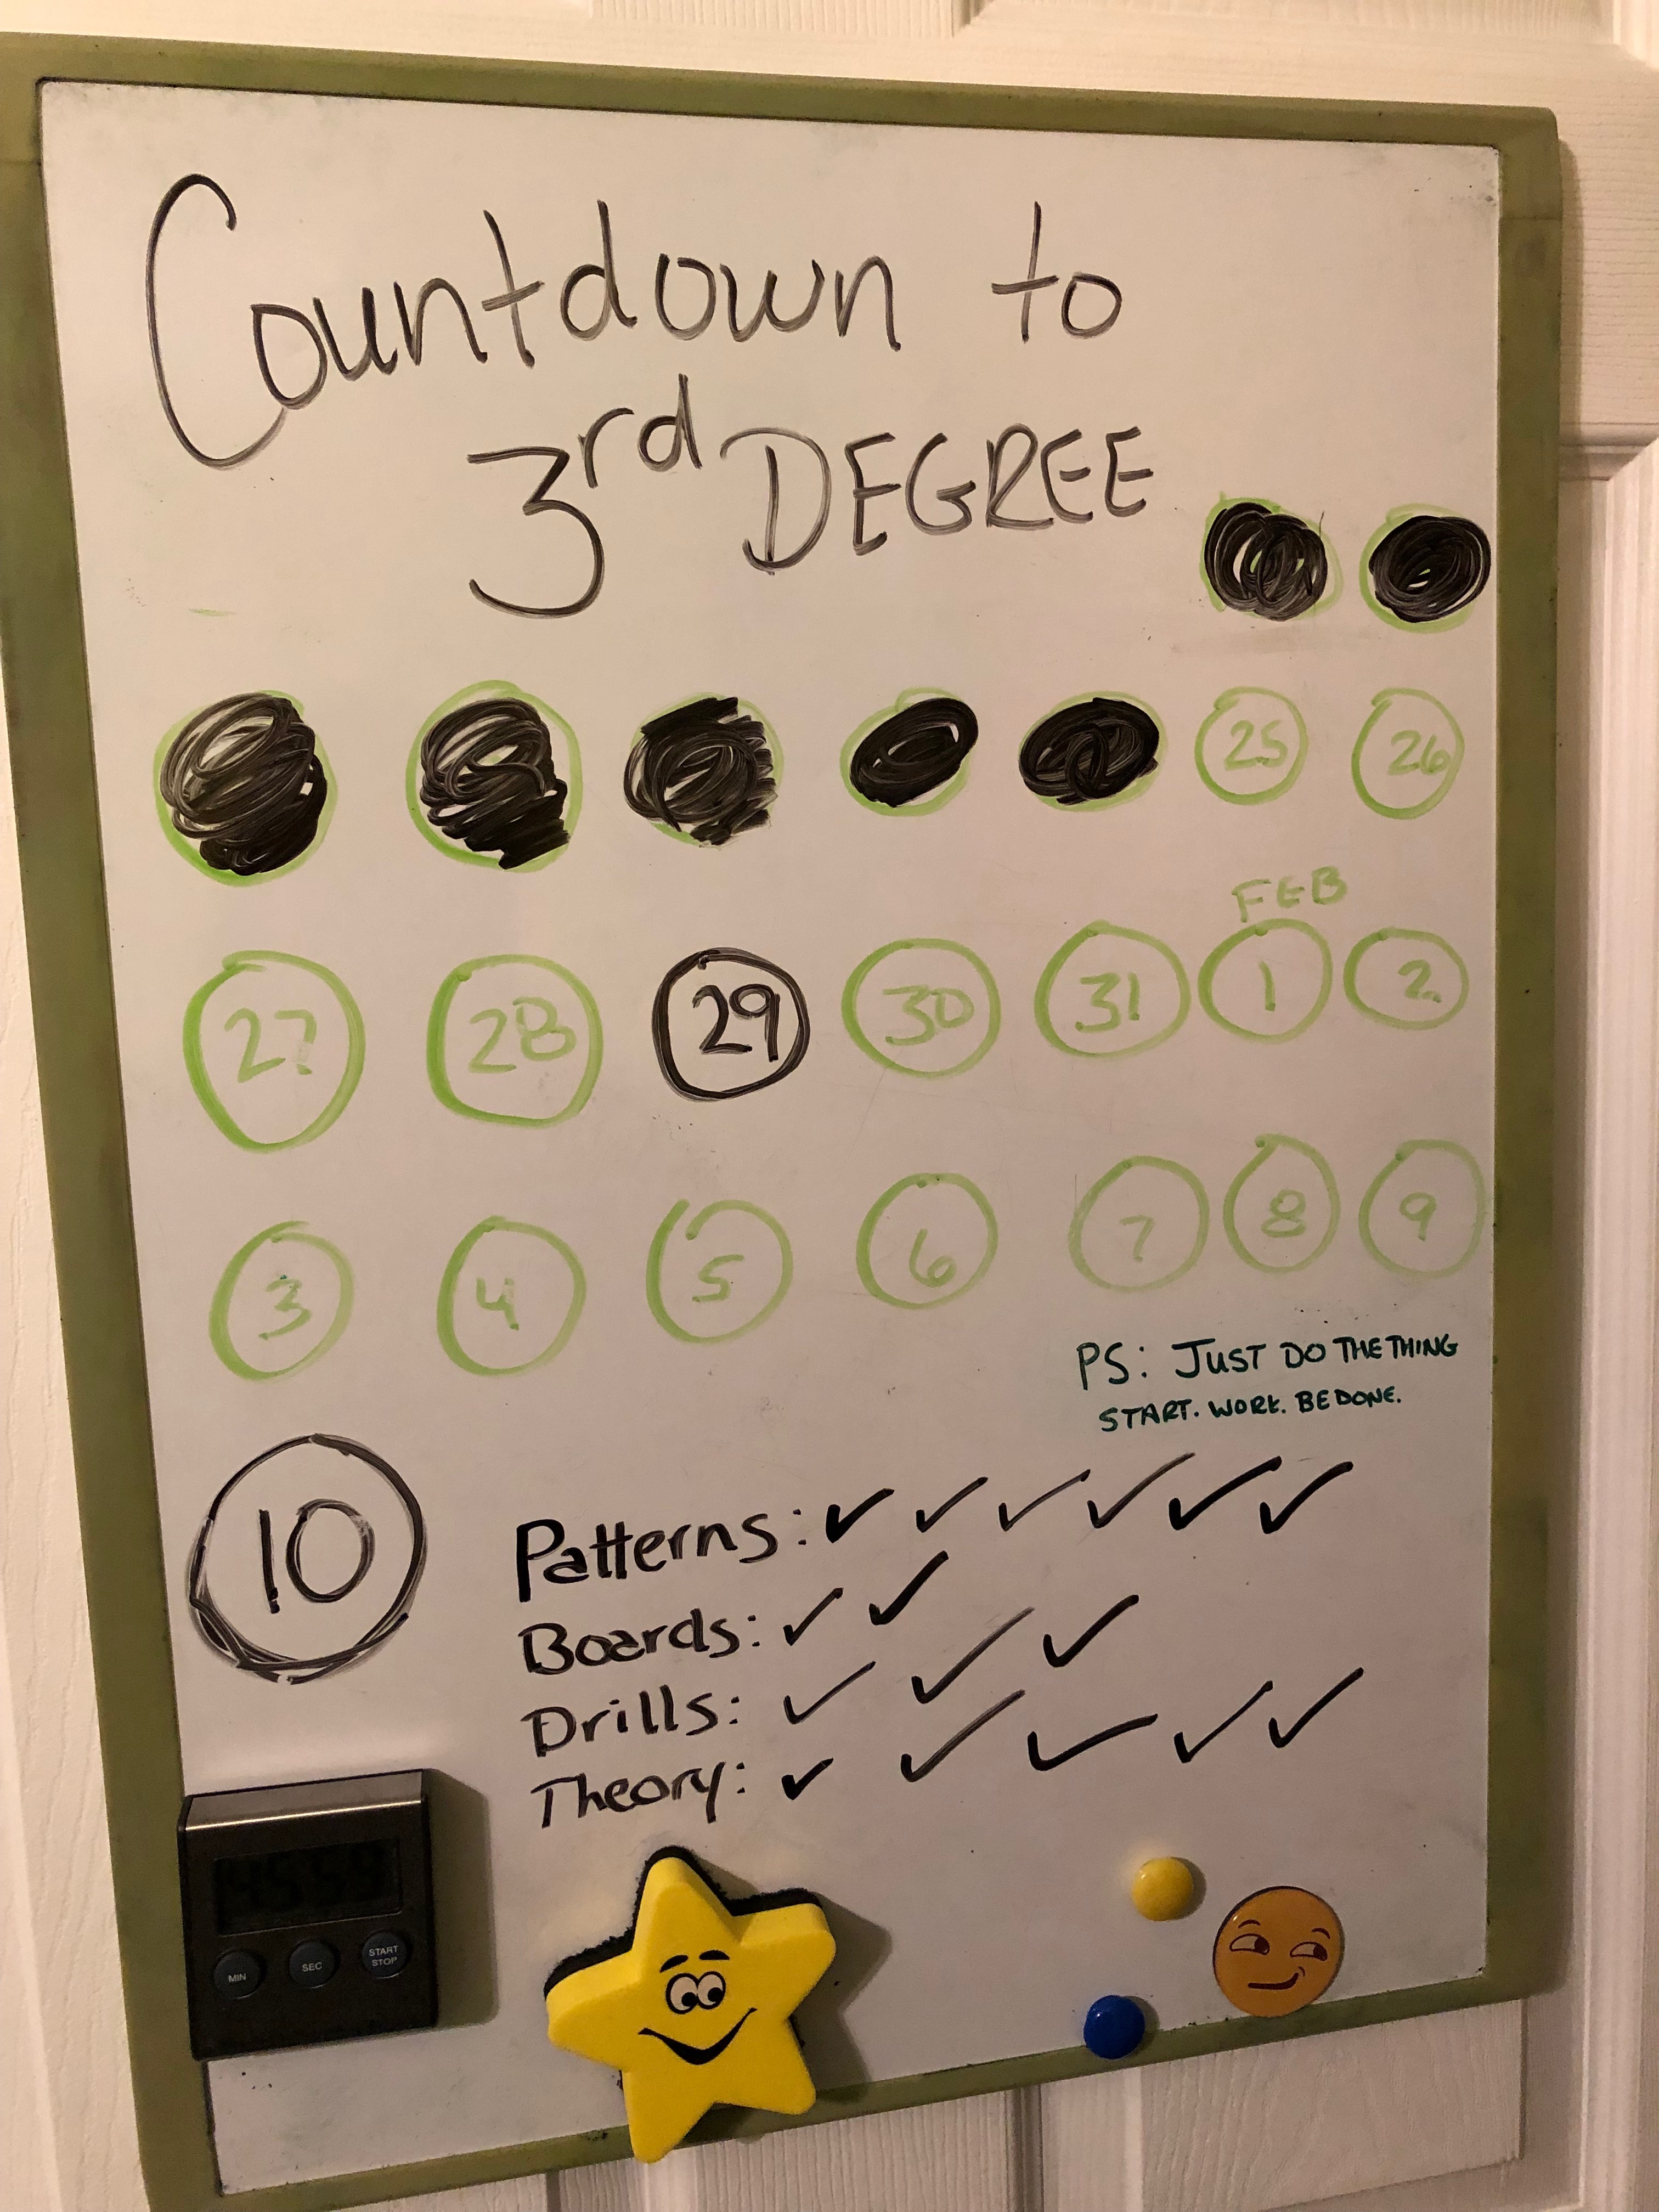 Photo shows a whiteboard with green trim with black text at the top that reads 'Countdown to 3rd Degree' There are 24 circles with dates in them and 7 circles are coloured in with black marker. Text below the circles reads "PS: Just do the thing. Start. Work. Be Done.'  and then there is a list that reads 'Patterns, Boards, Drills, Theory' with check marks after each word. There is a timer, a star shaped magnet and a smirking emoji magnet at the bottom of the whiteboard.